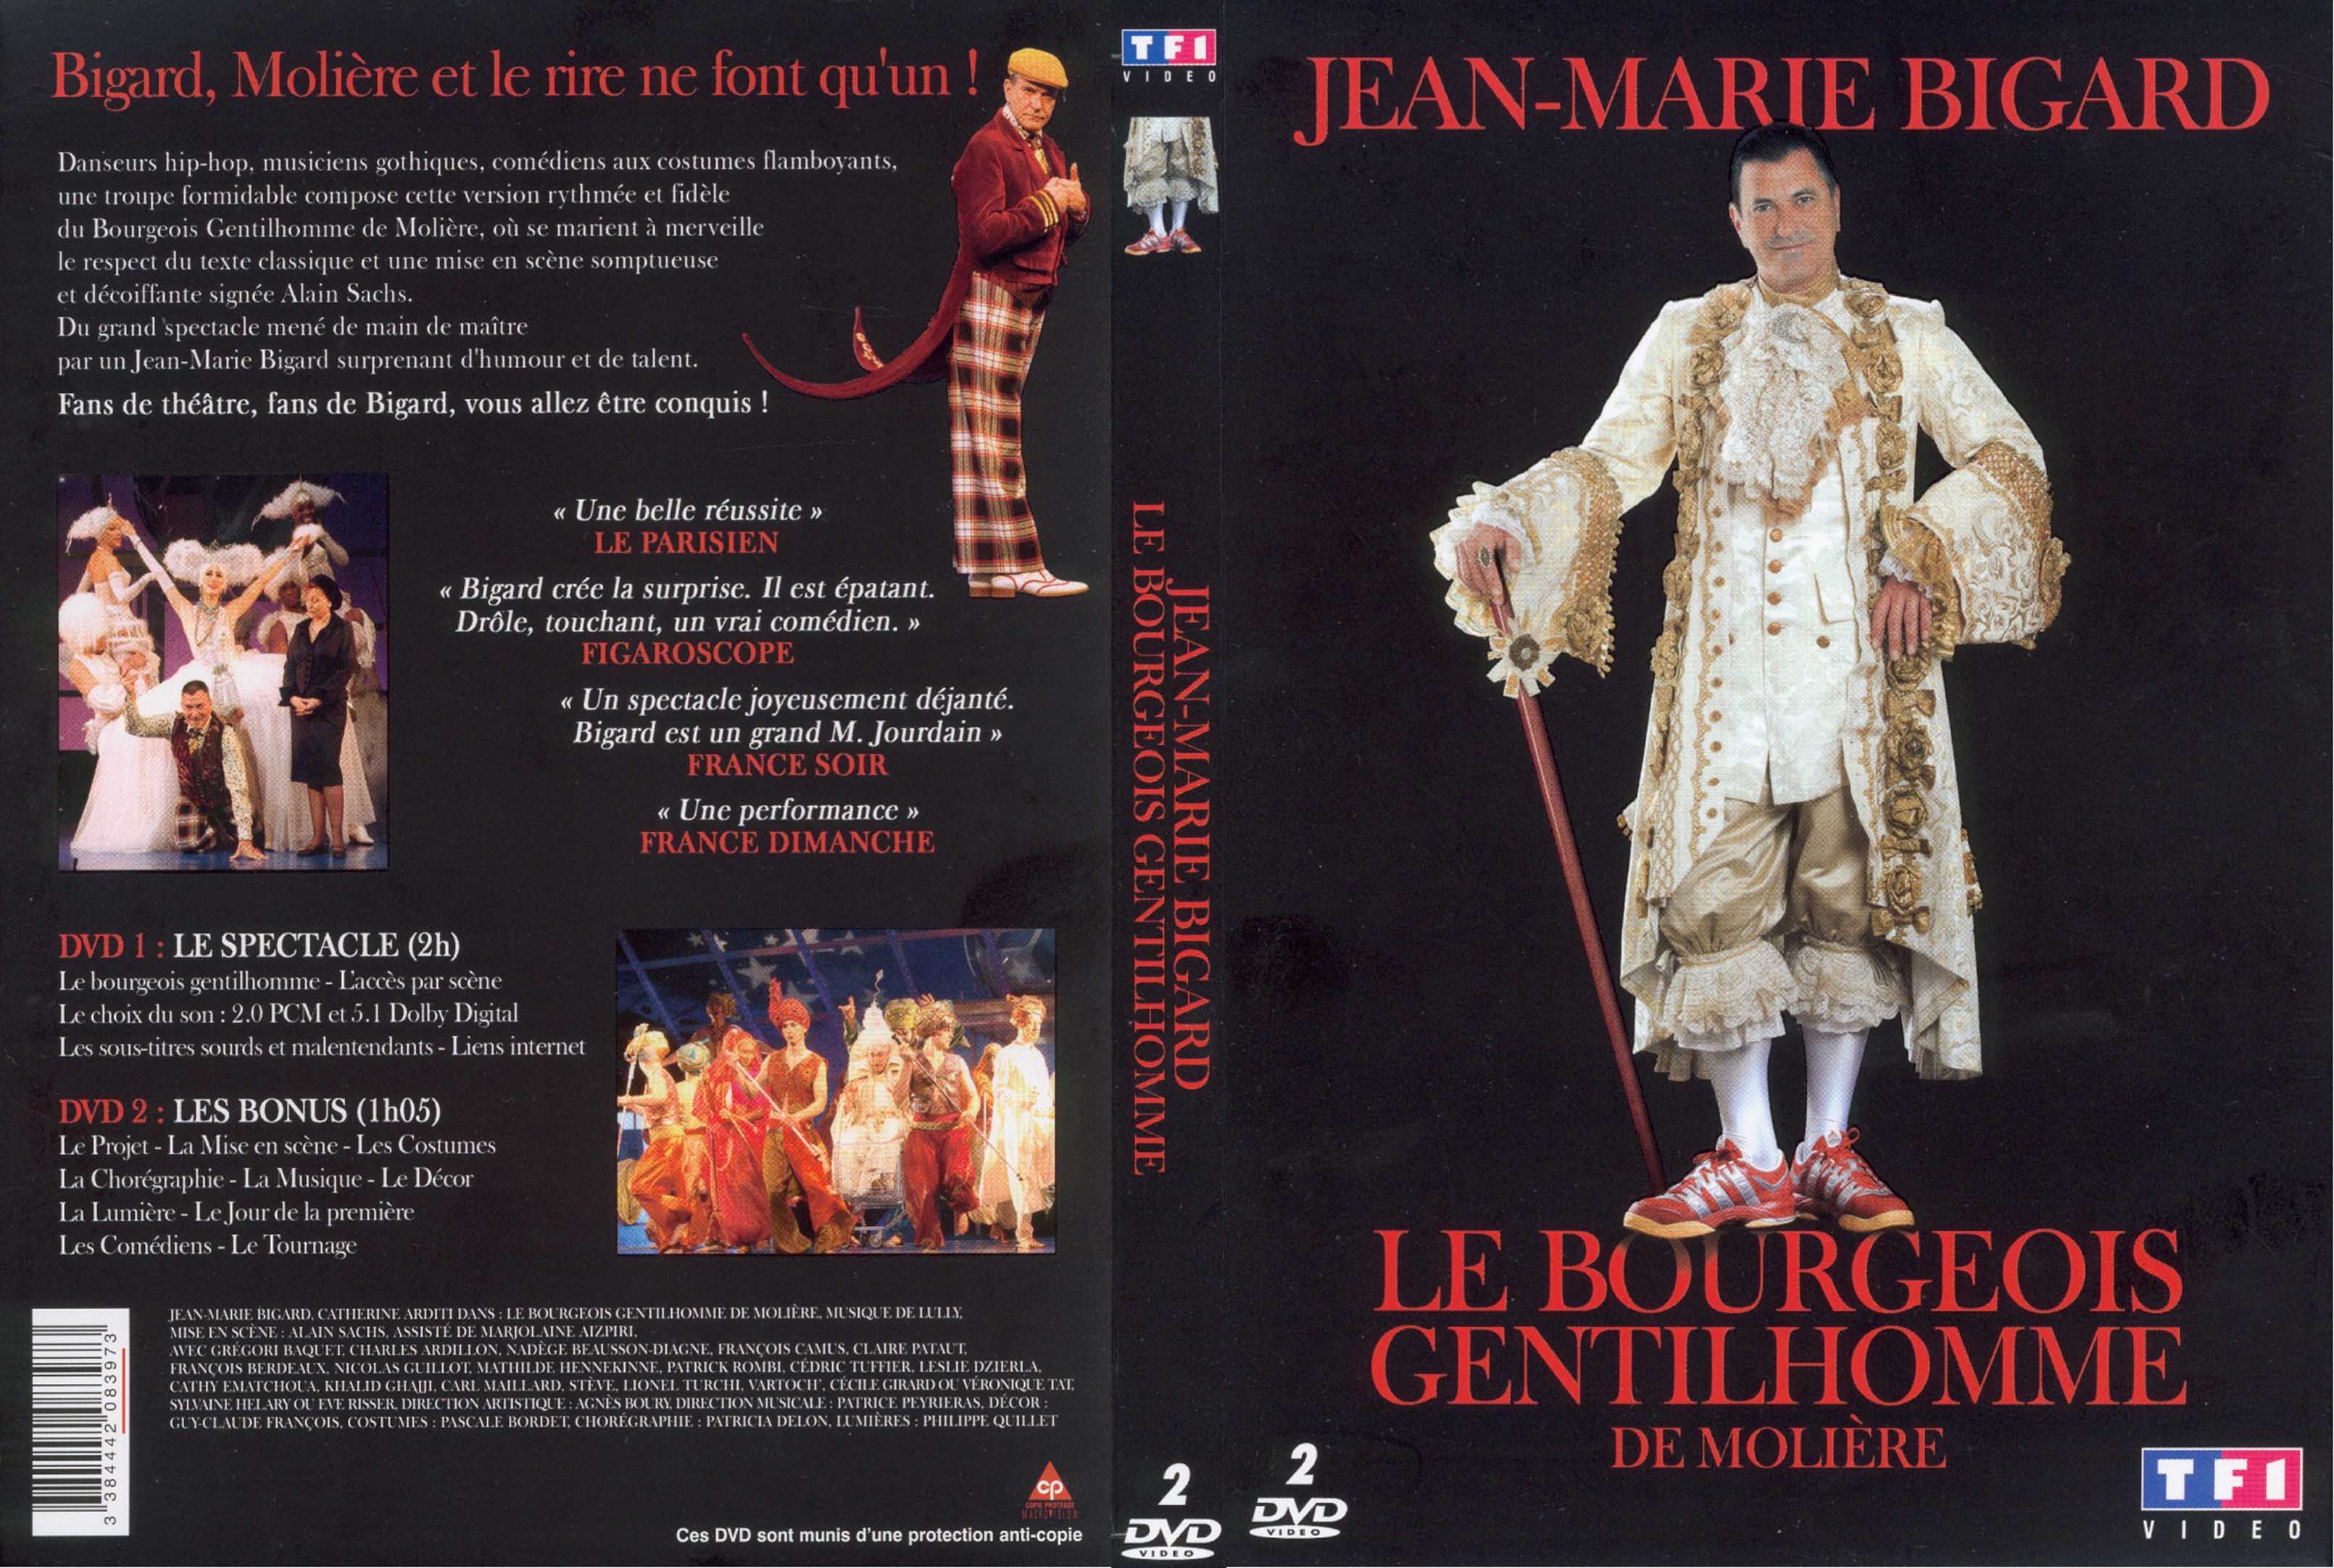 Jaquette DVD Bigard le bourgeois gentilhomme